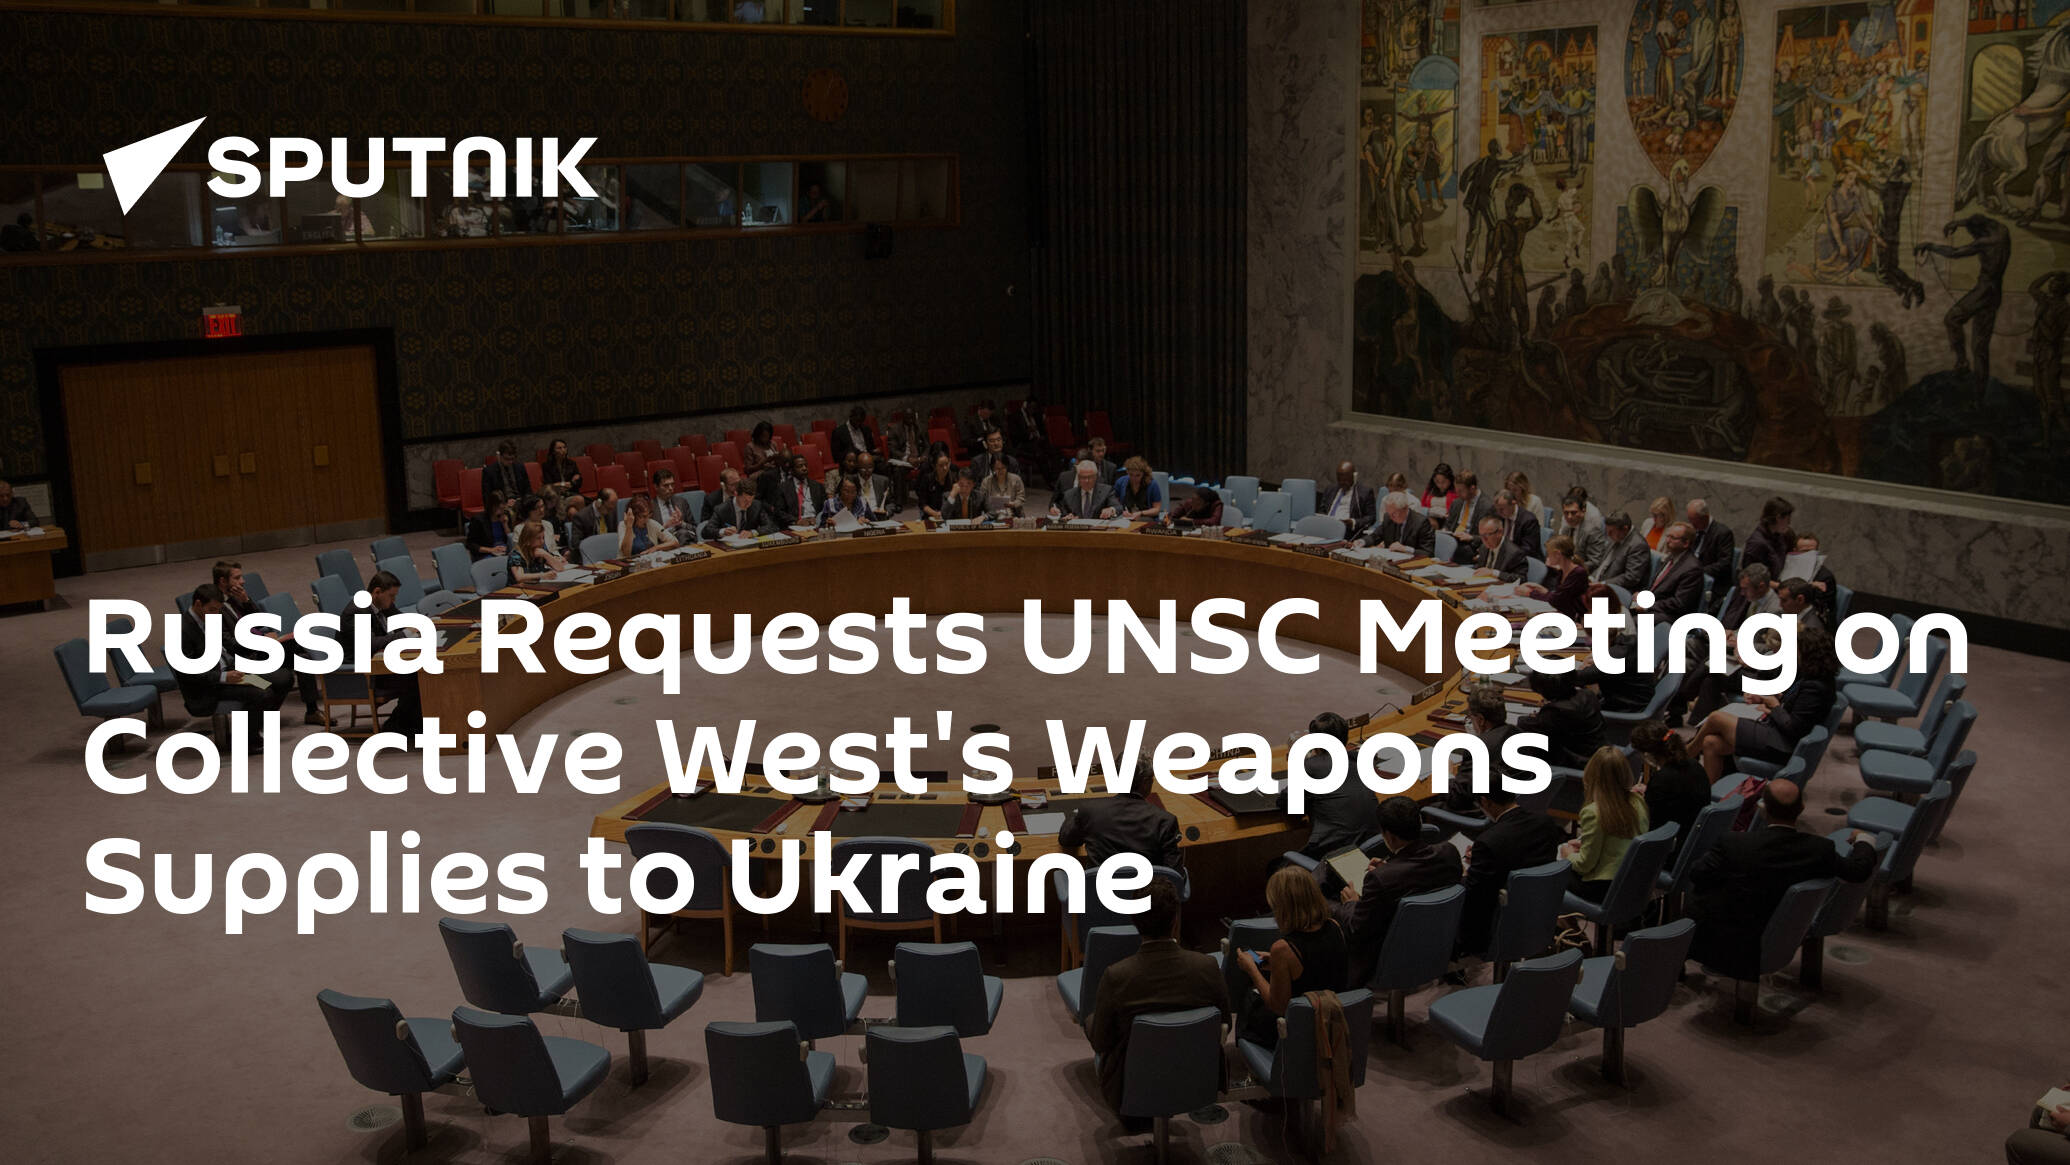 Russia Requests UNSC Meeting on Collective West's Weapons Supplies to Ukraine